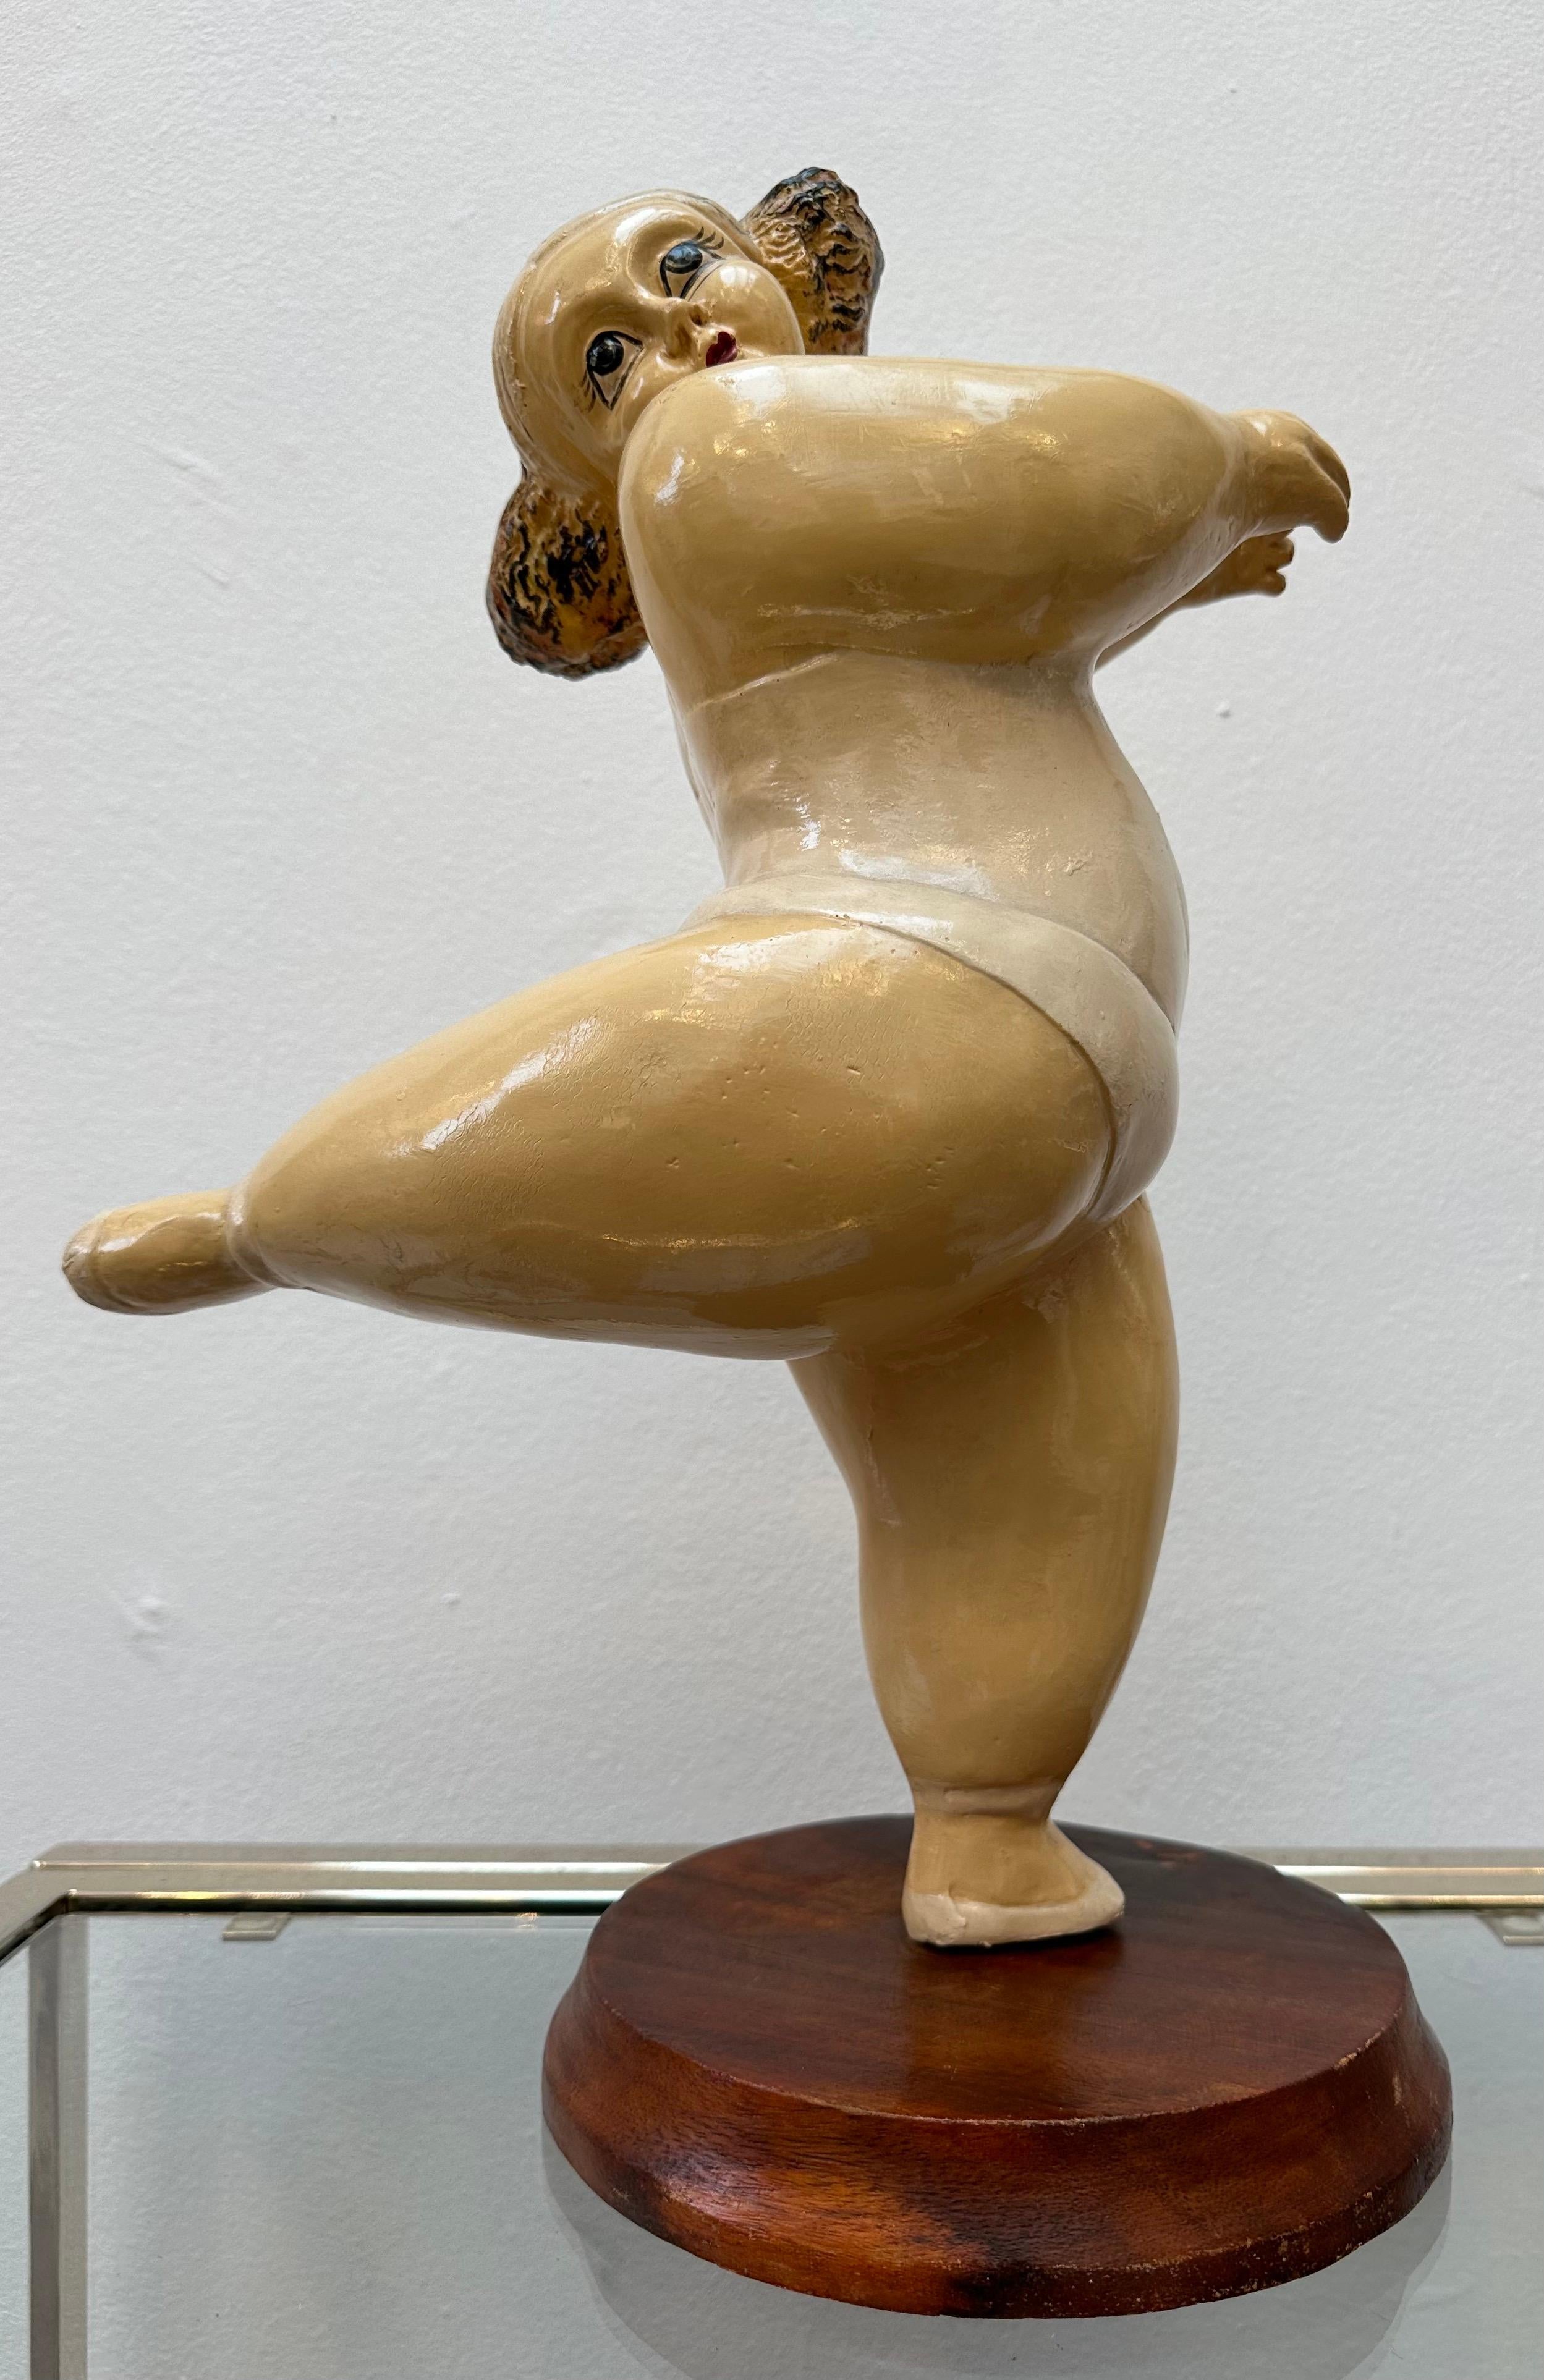 A fun decorative figurine of a dancing full-figured ballerina in the Á deux bras position with both arms in the forward position. I have been unable to exactly identify its provenance but it dates to late 1960s/70s in Scandinavia perhaps Sweden. The